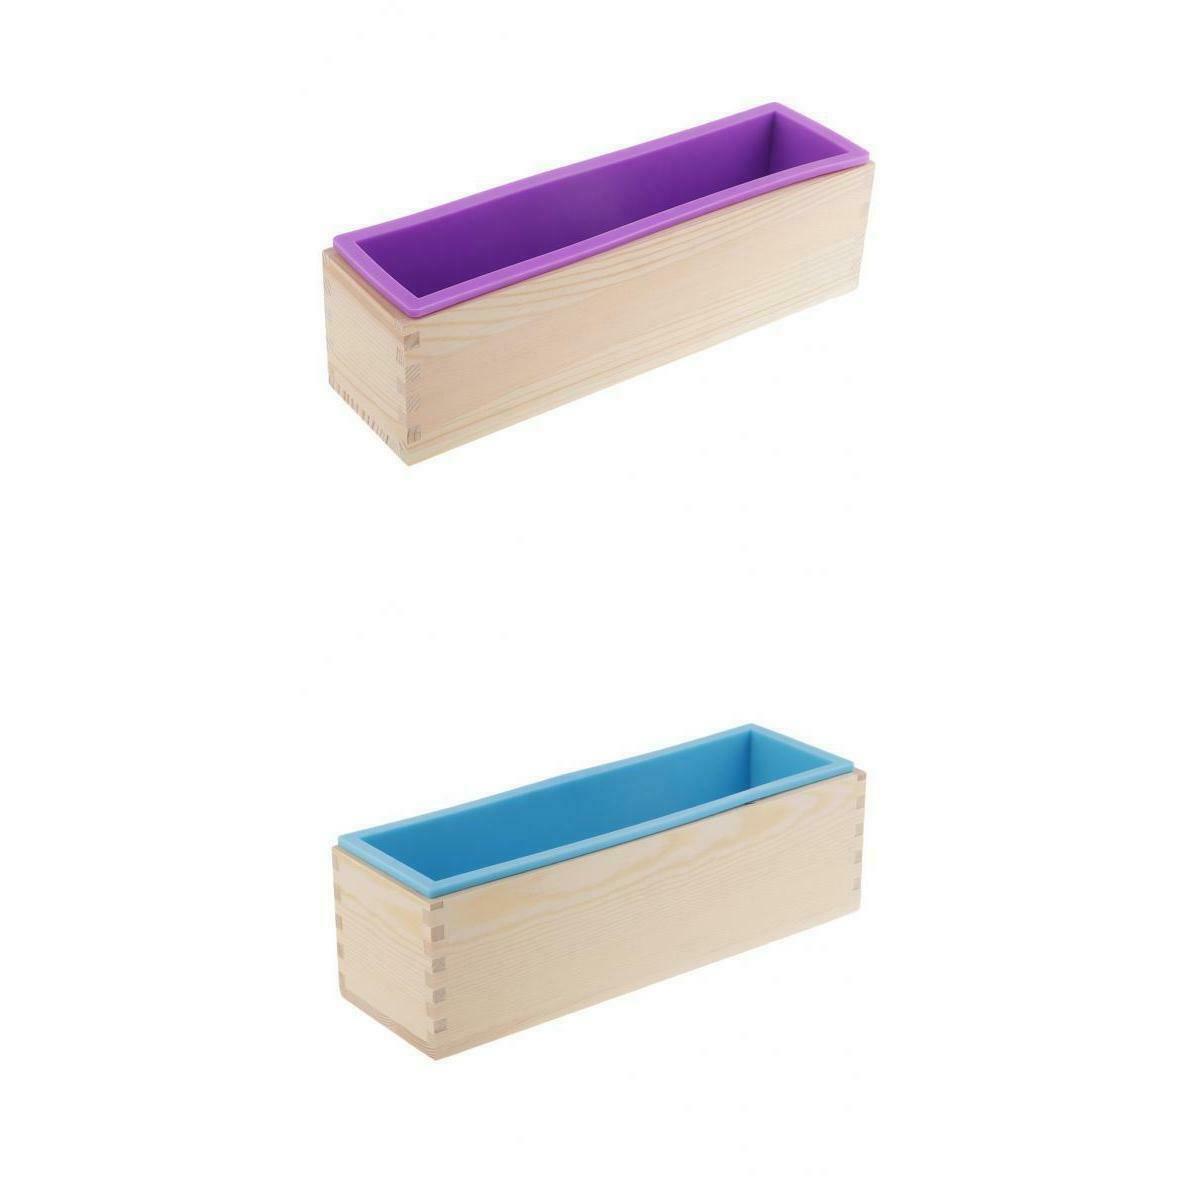 2Pcs Soap Silicone Loaf Mould Wood Box Bread Pastry Baking DIY Soap Making Tools